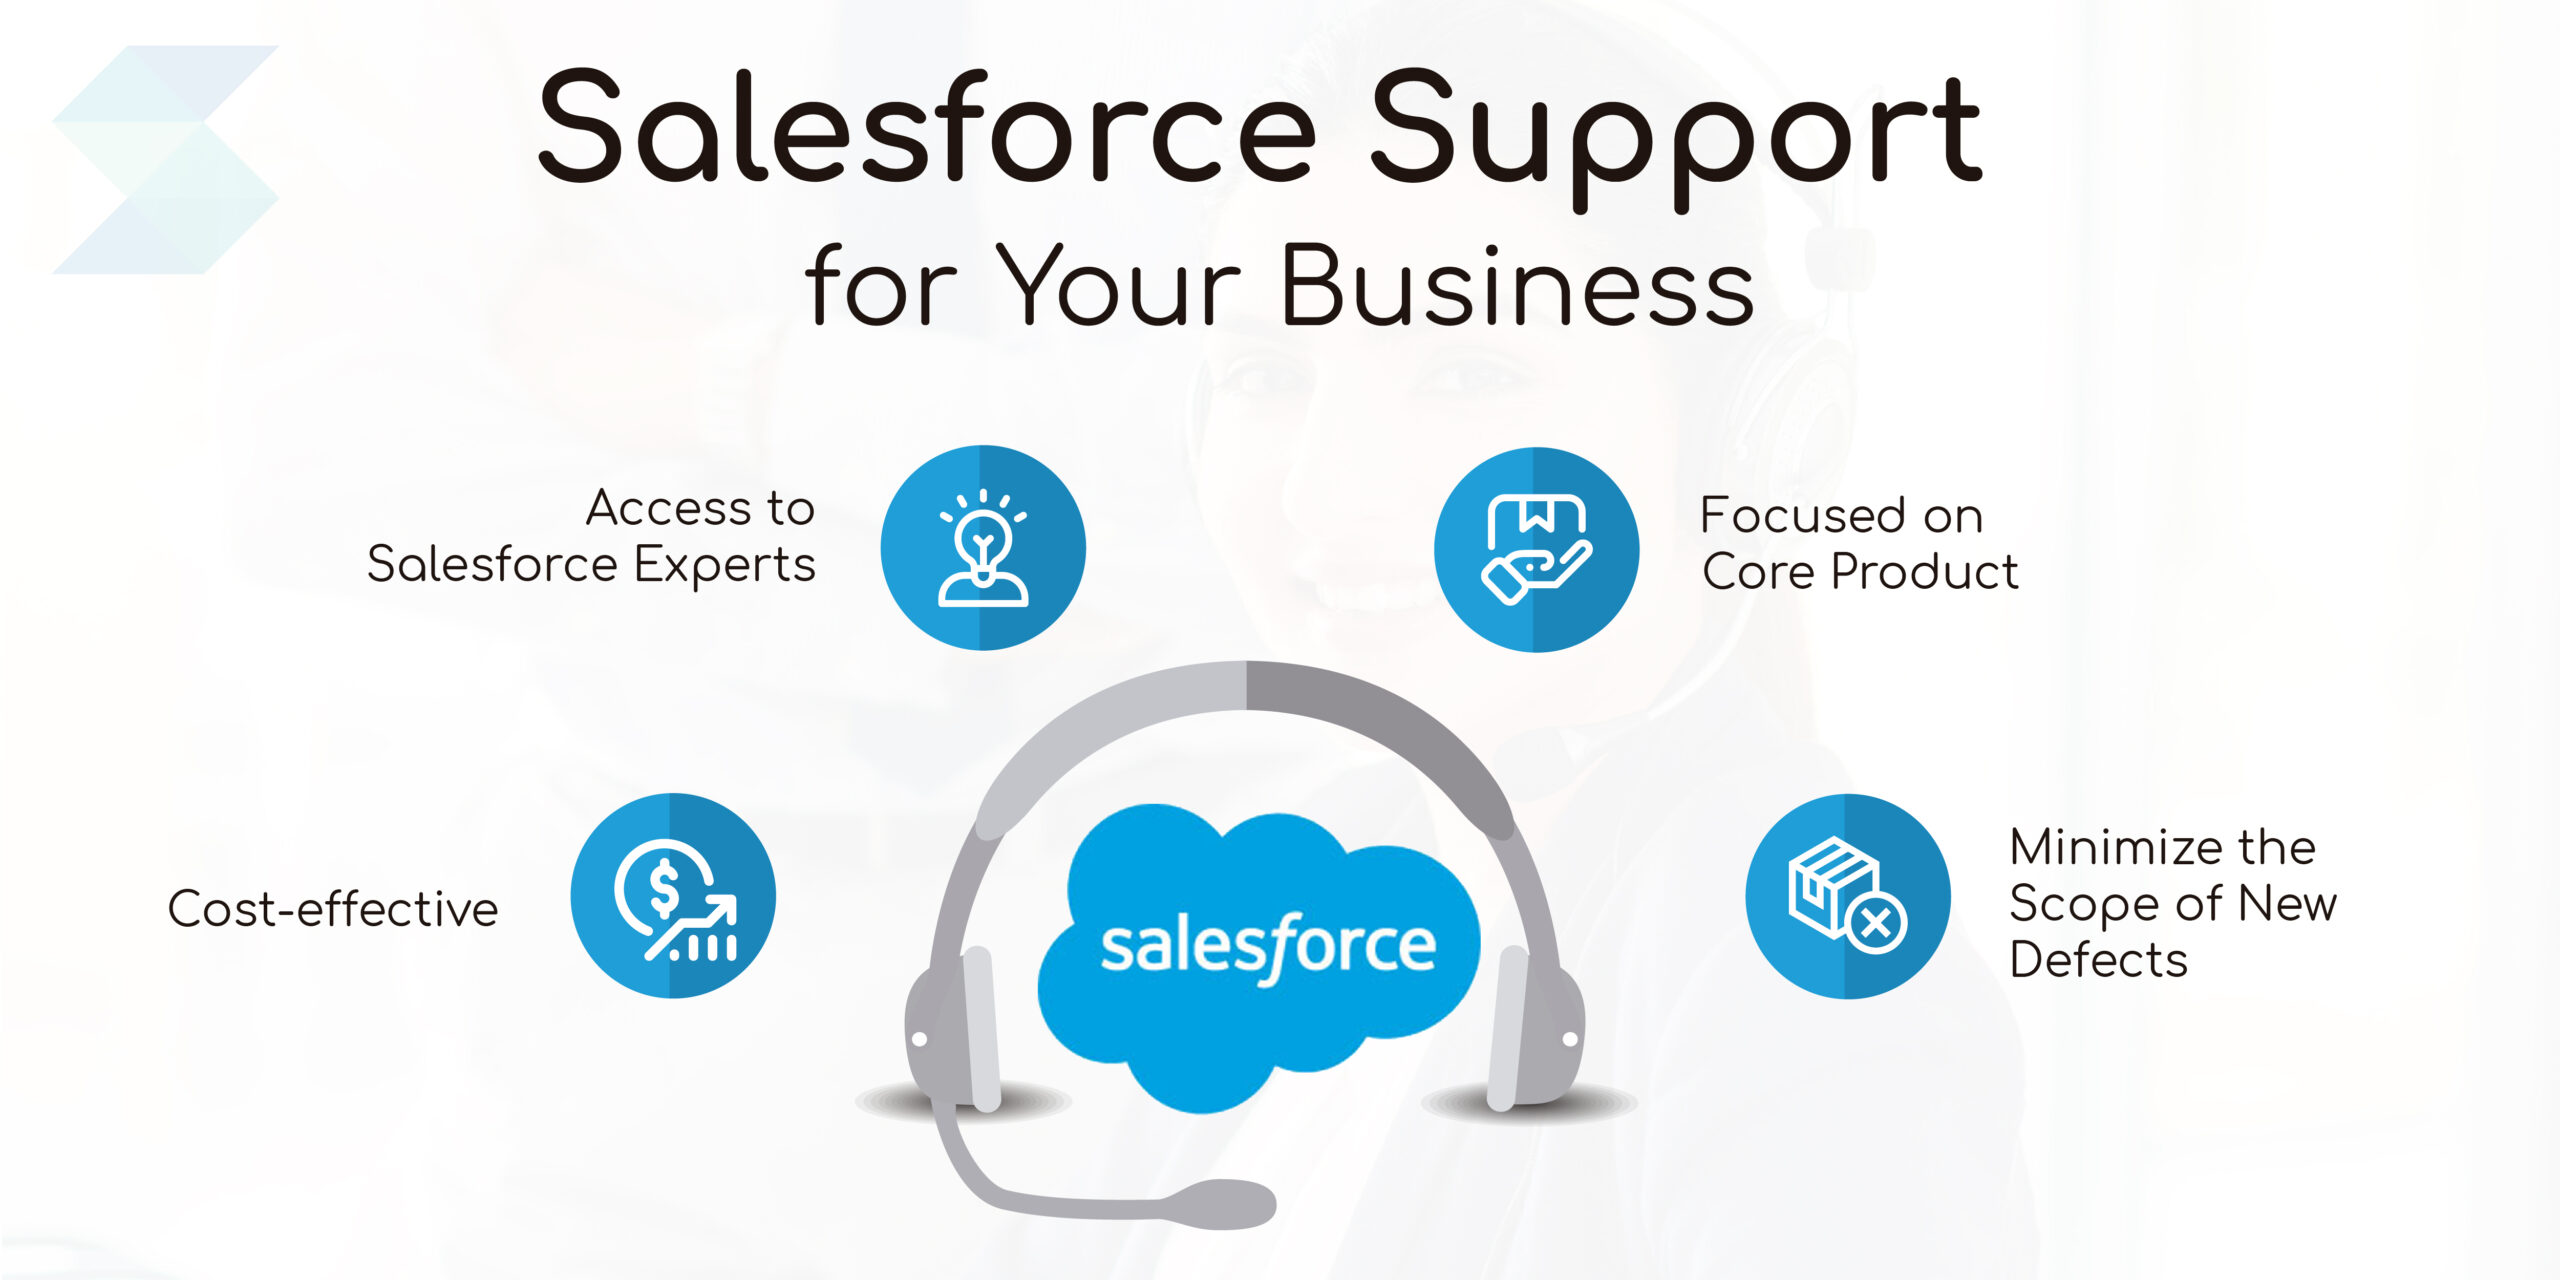 Salesforce Support for Your Business